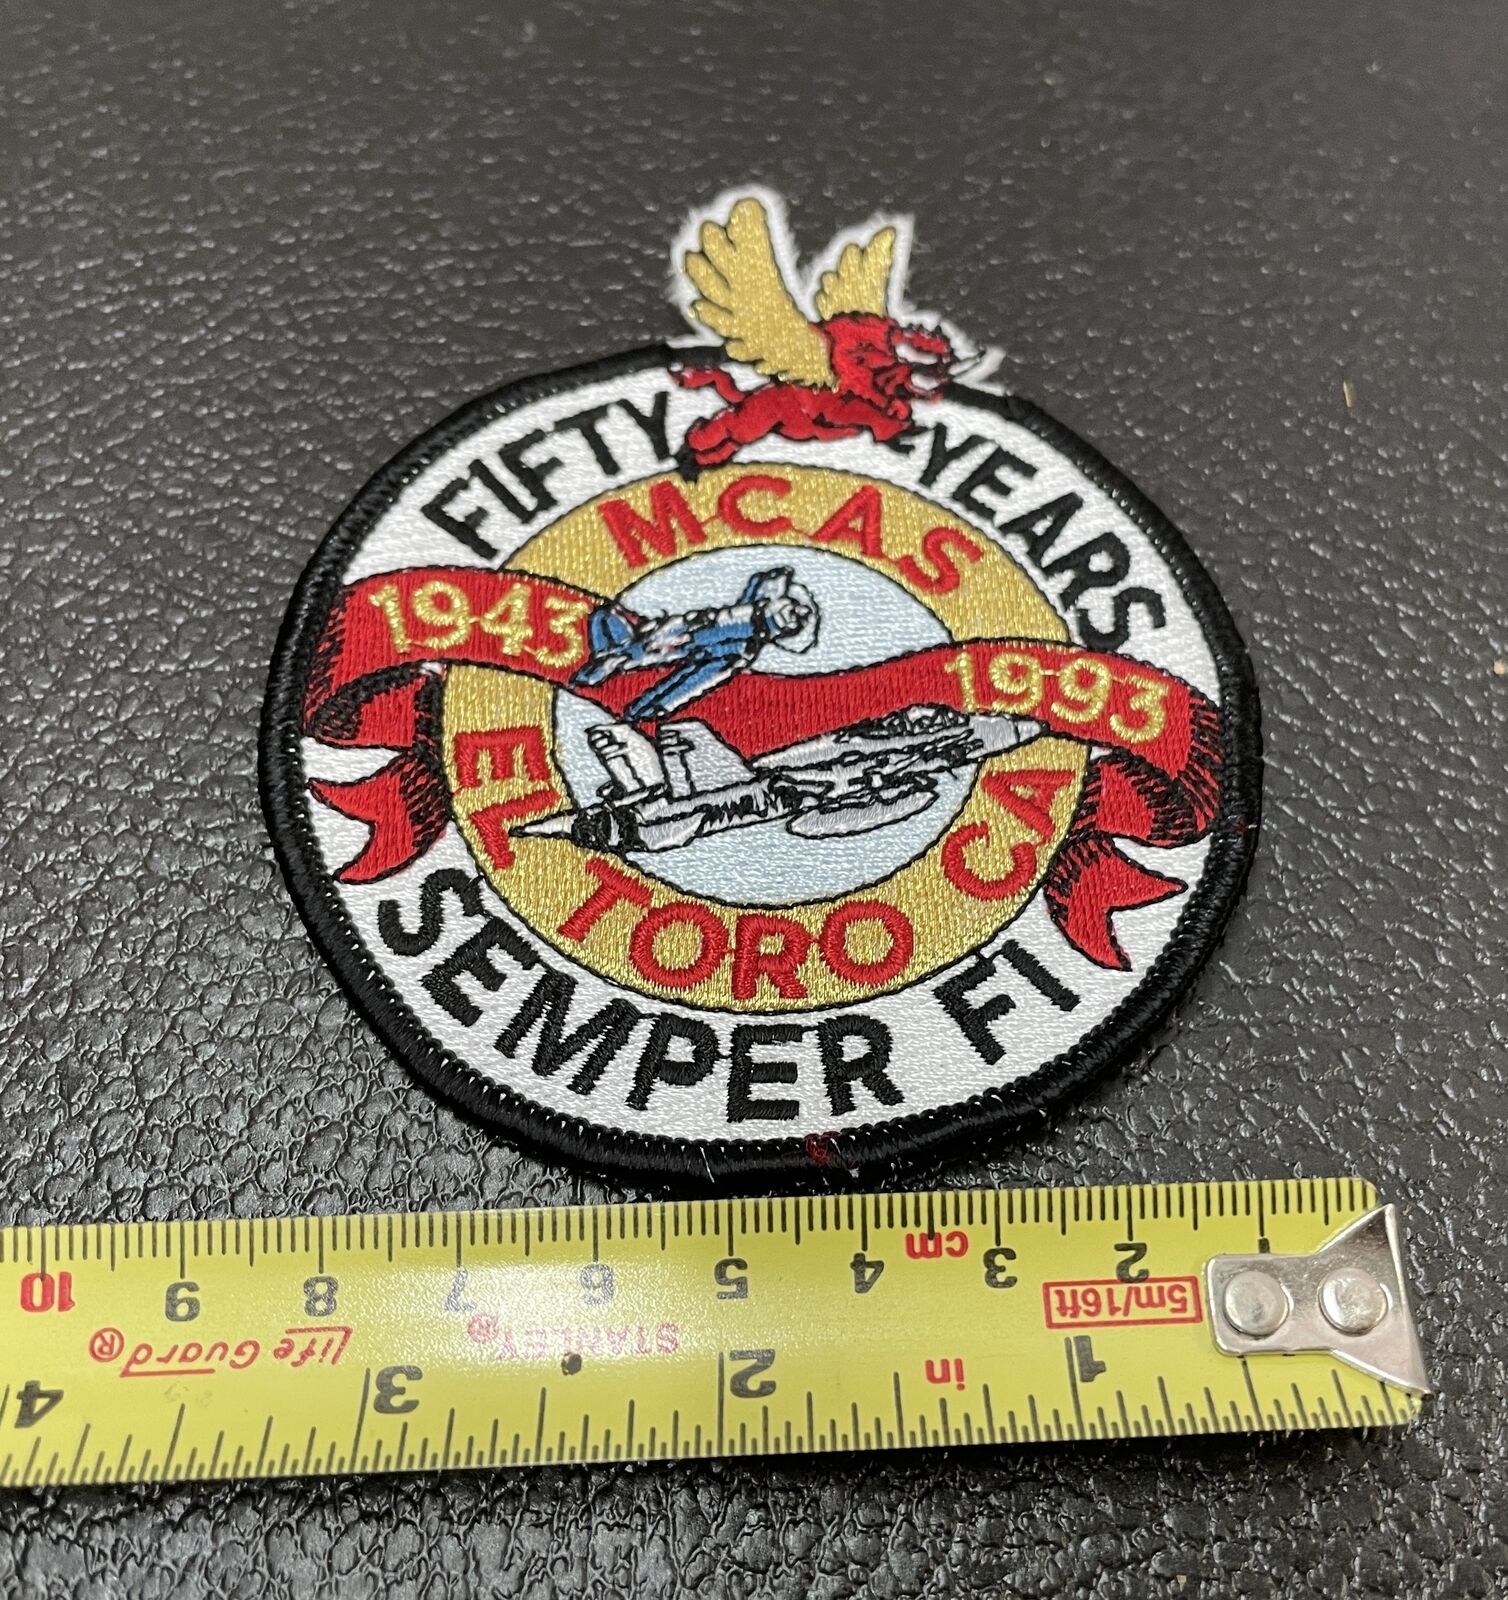 Marine Corps Fifty Years Semper Fi MCAS El Toro Ca 1943-1993 Embroidered Patch